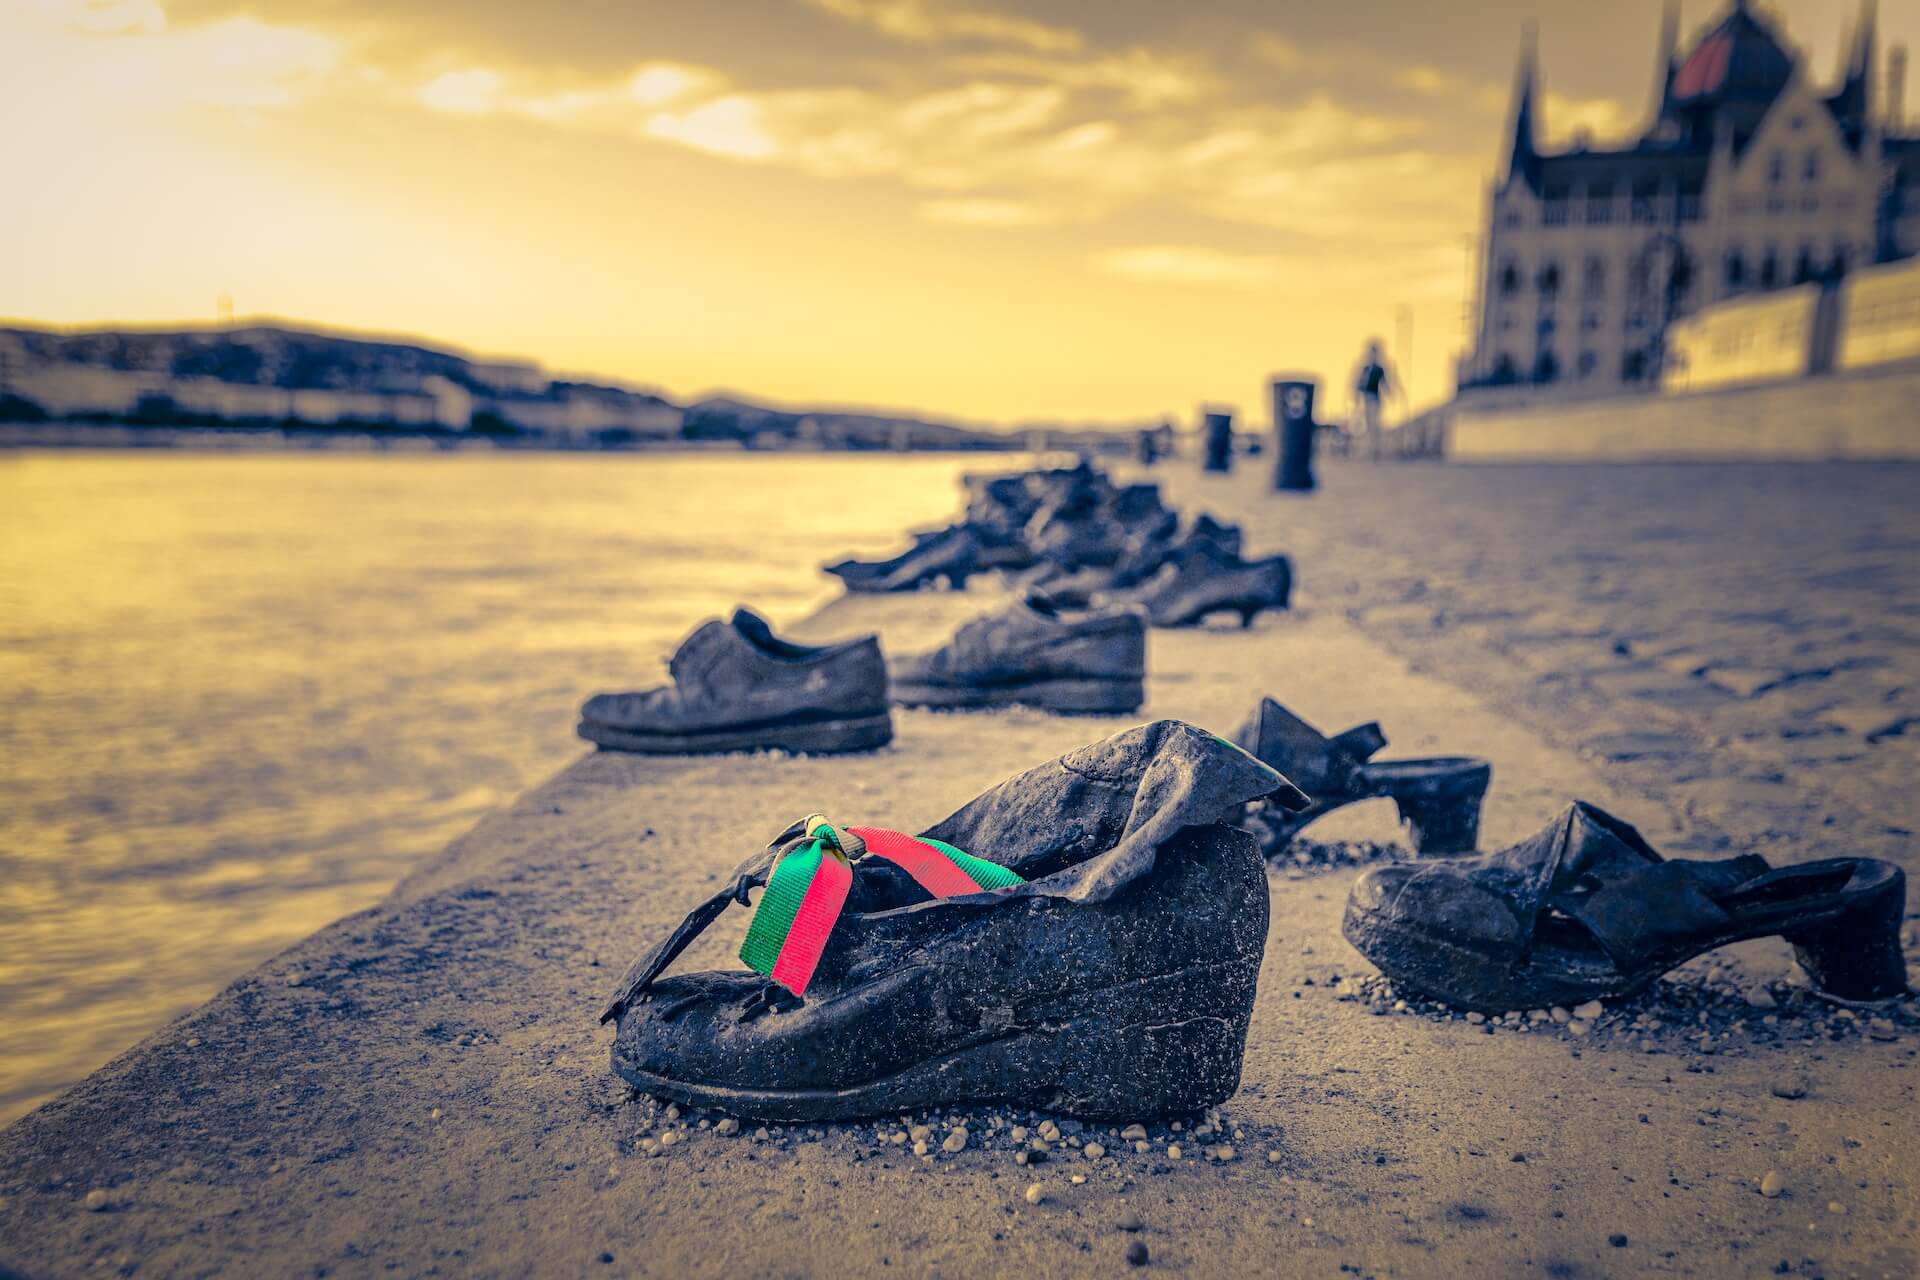 photo of the metal shoes on the Danube bank in Budapest